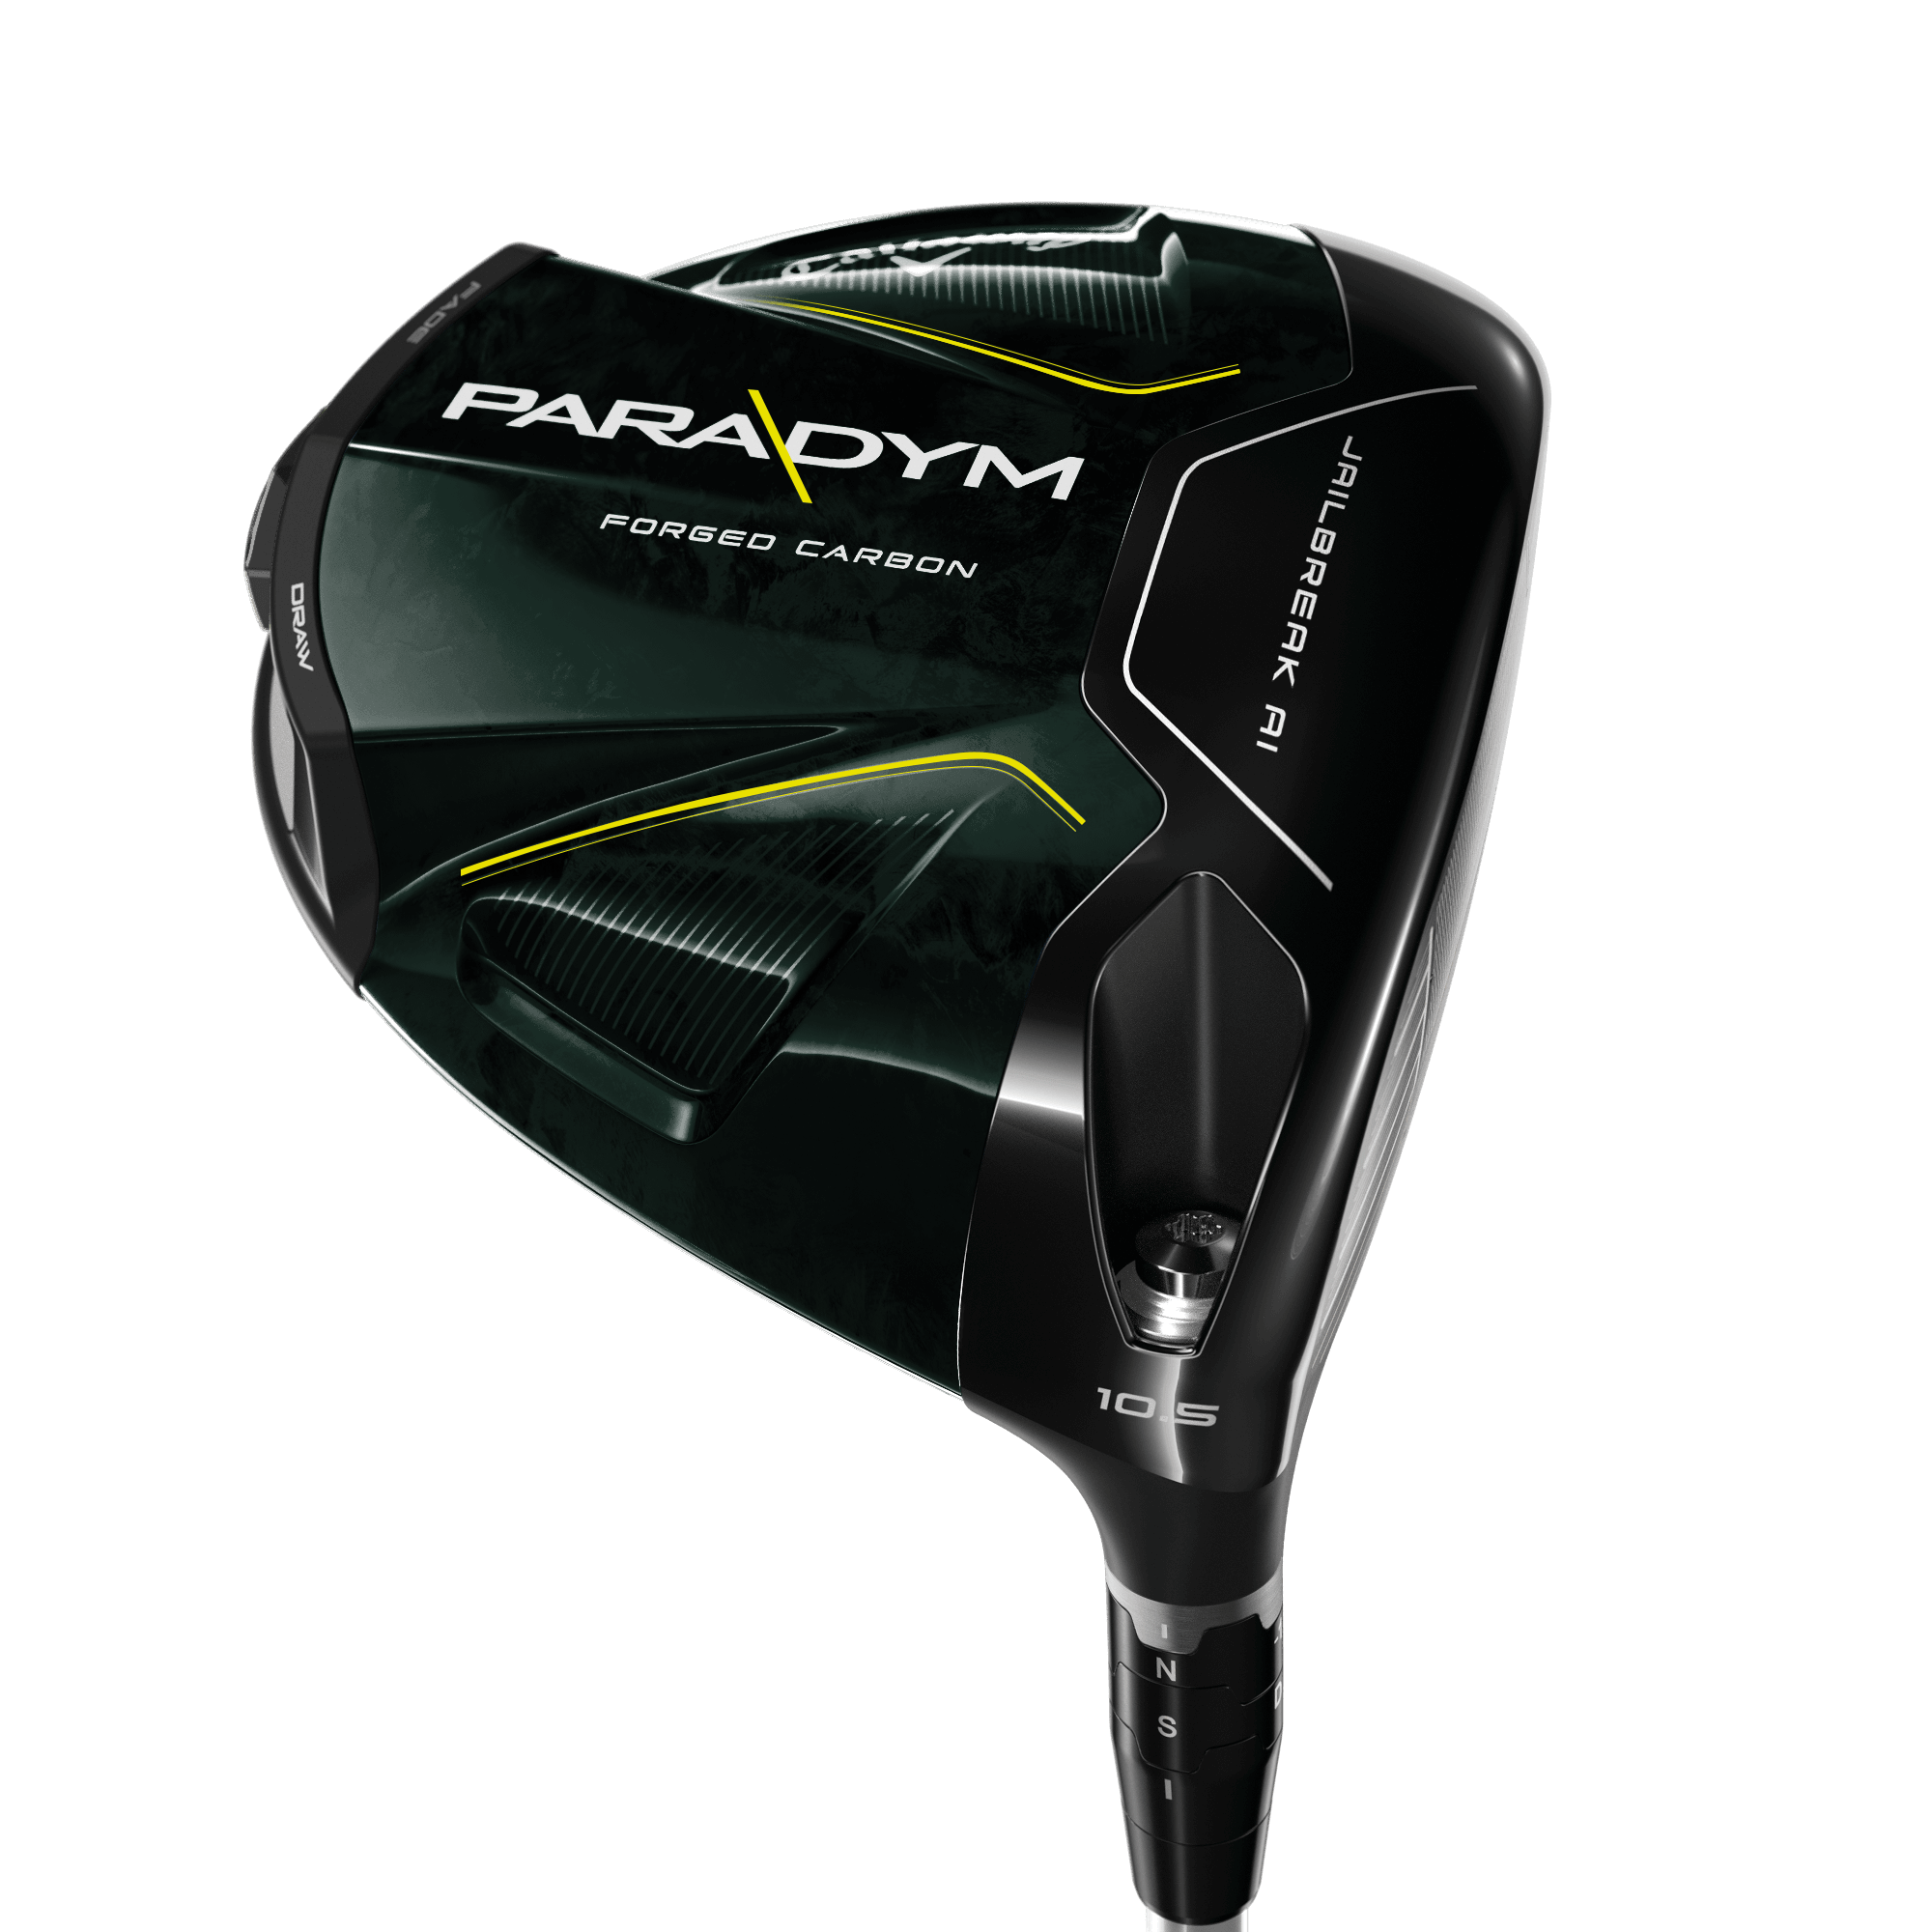 Callaway Paradym Limited Edition Driver | PGA TOUR Superstore